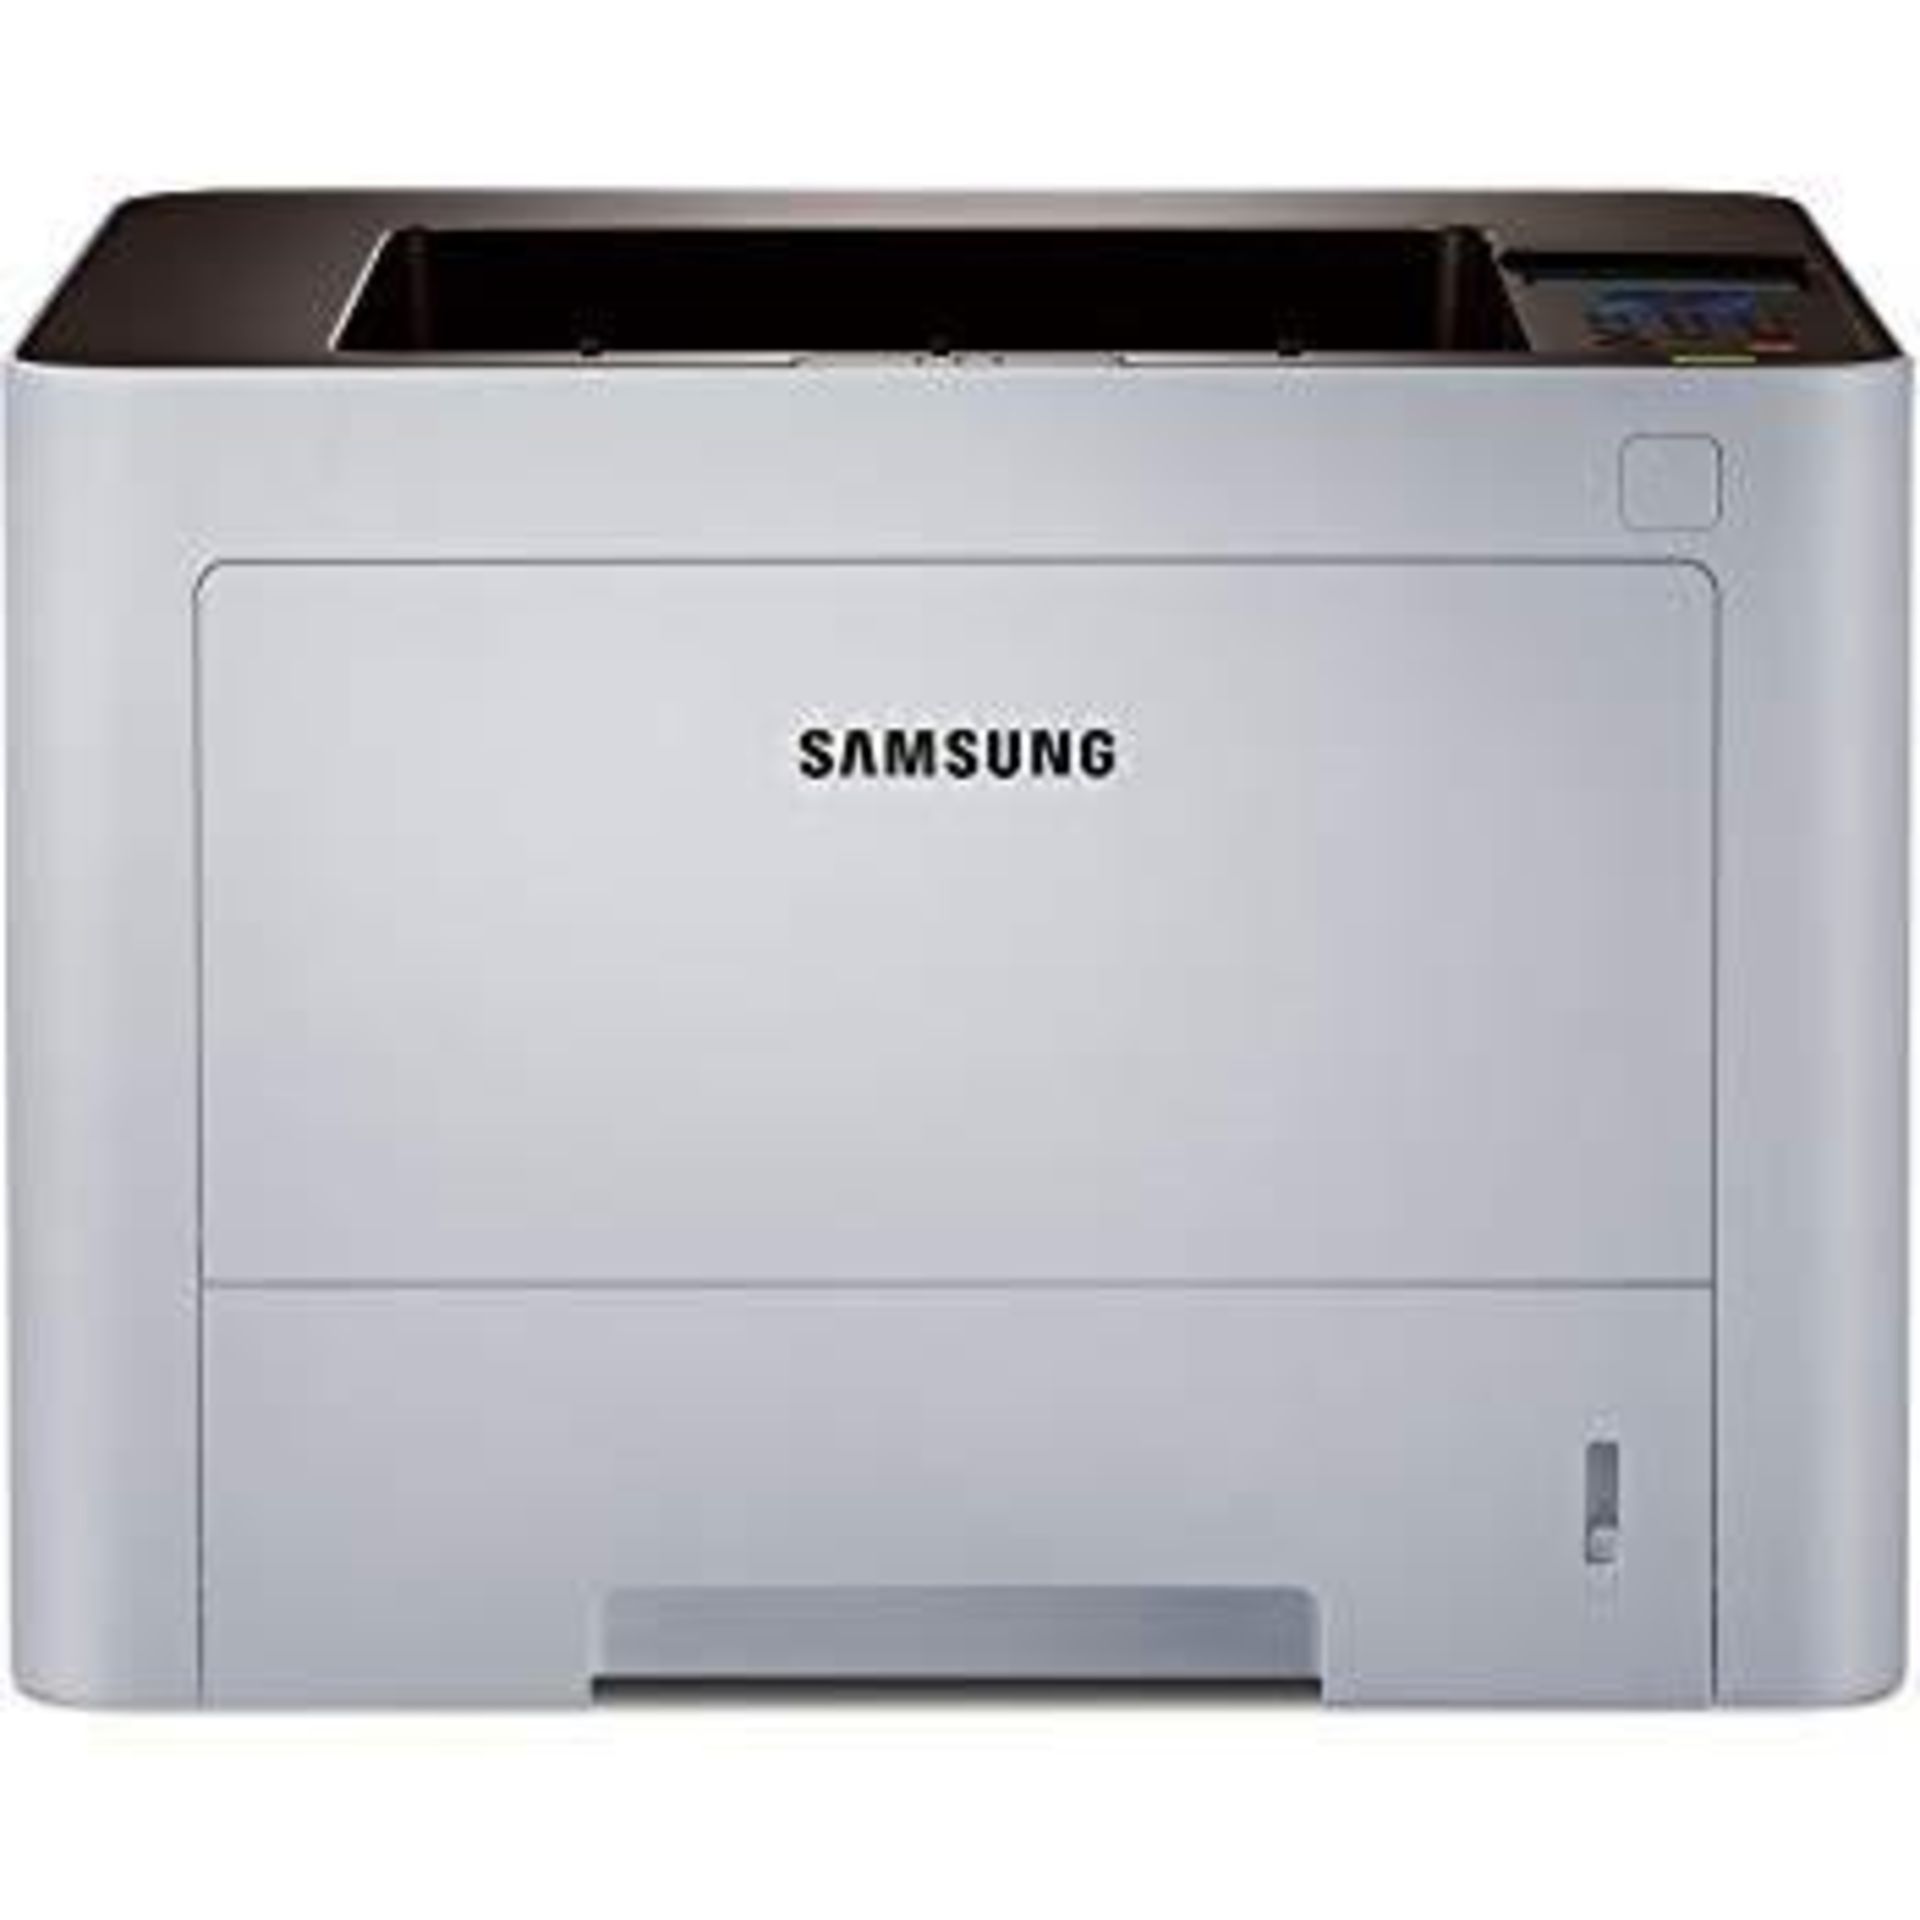 1 x Samsung ProXpress M3820ND A4 Mono Laser Printer - Only 663 Impressions, 65% Toner Level, See T - Image 5 of 5